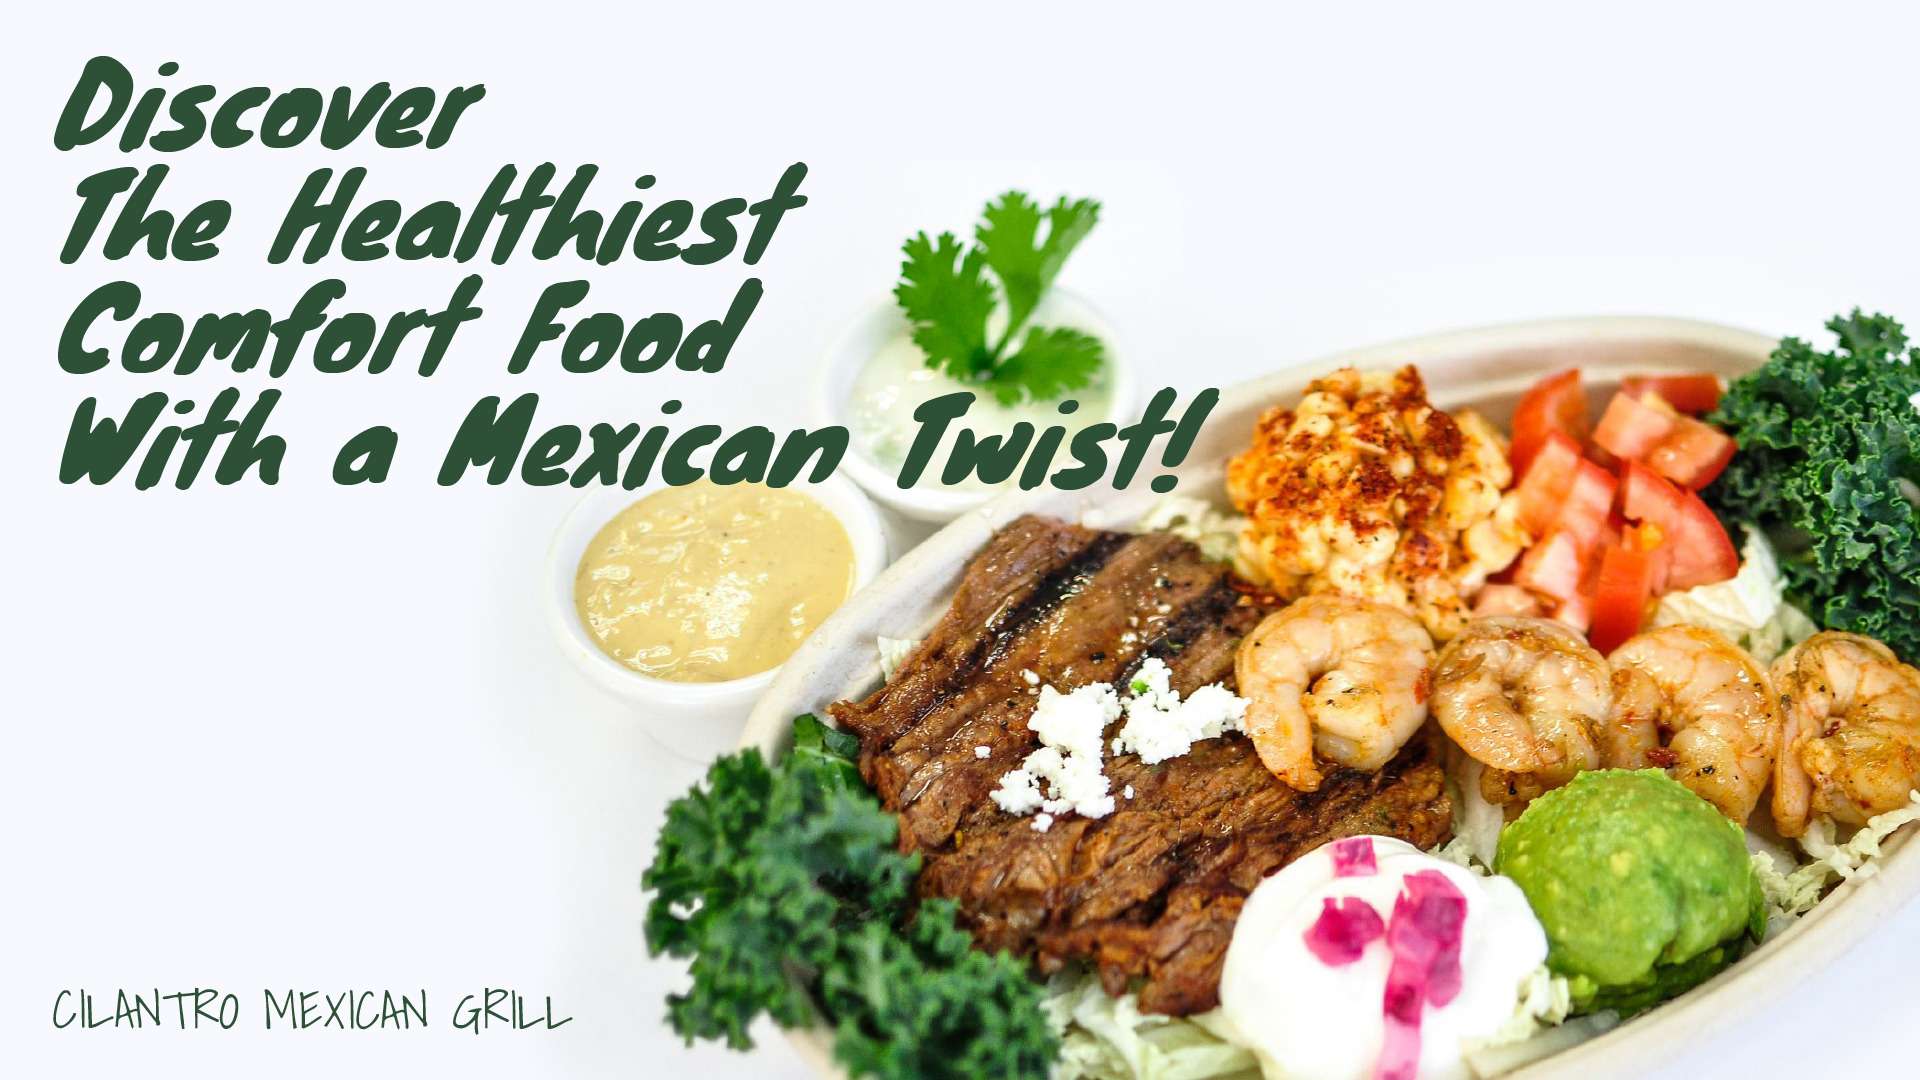 Cilantro Mexican Grill: Discover the Healthiest Comfort Food with a Mexican Twist!